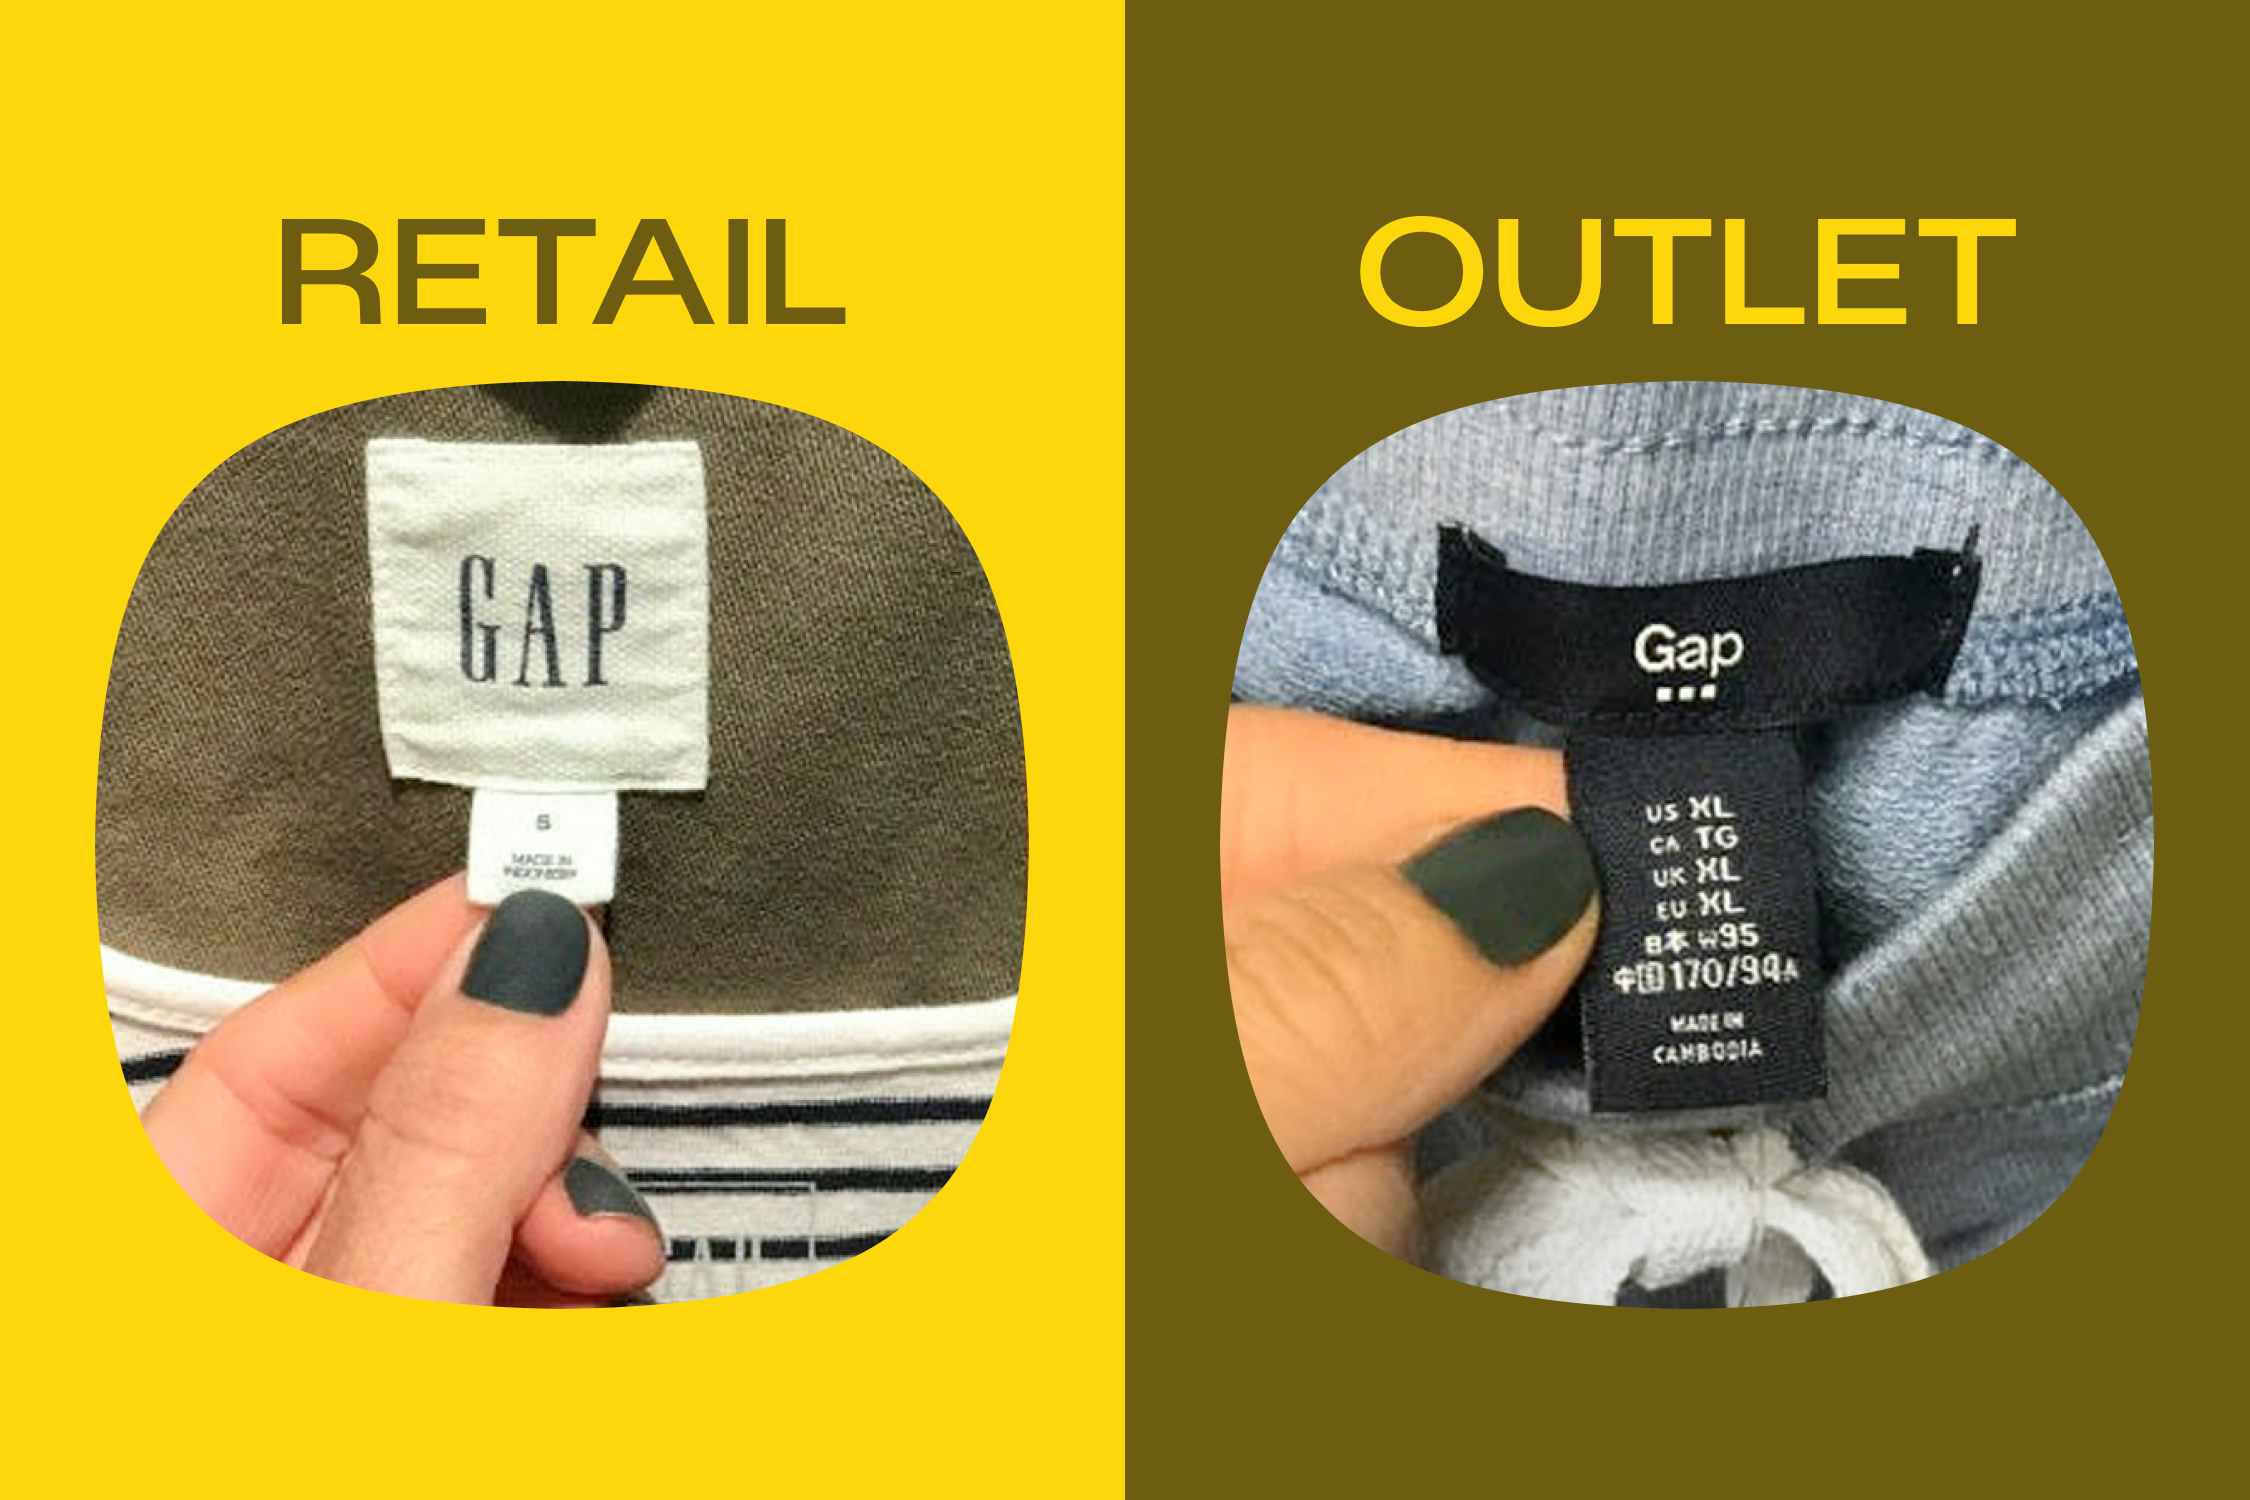 a side-by-side comparison of the retail and outlet attributes for GAP